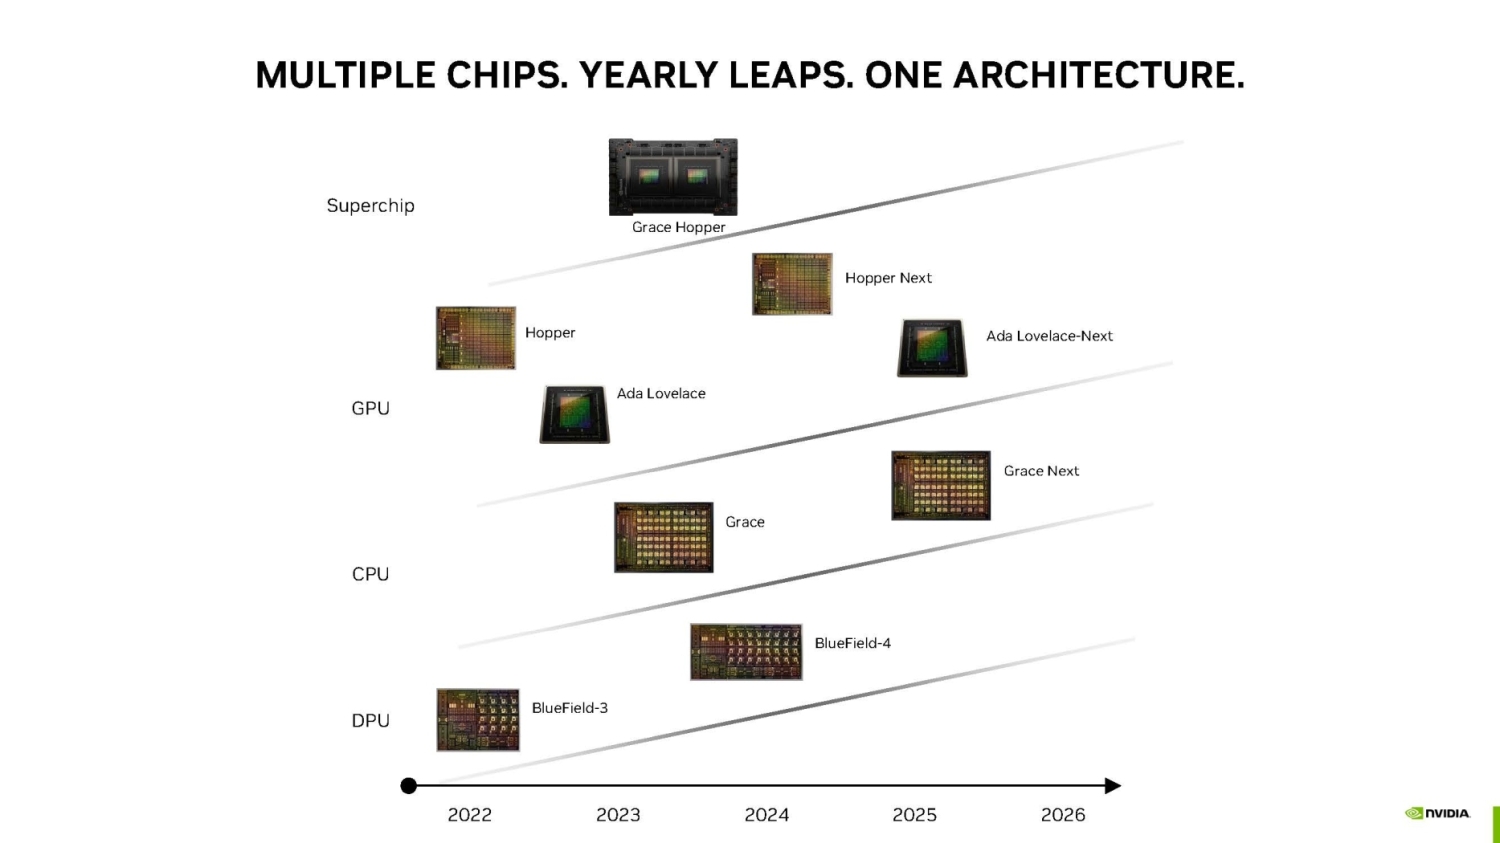 Nvidia roadmap image showing projected GPU architecture release dates, including Ada Lovelace-Next in 2025.